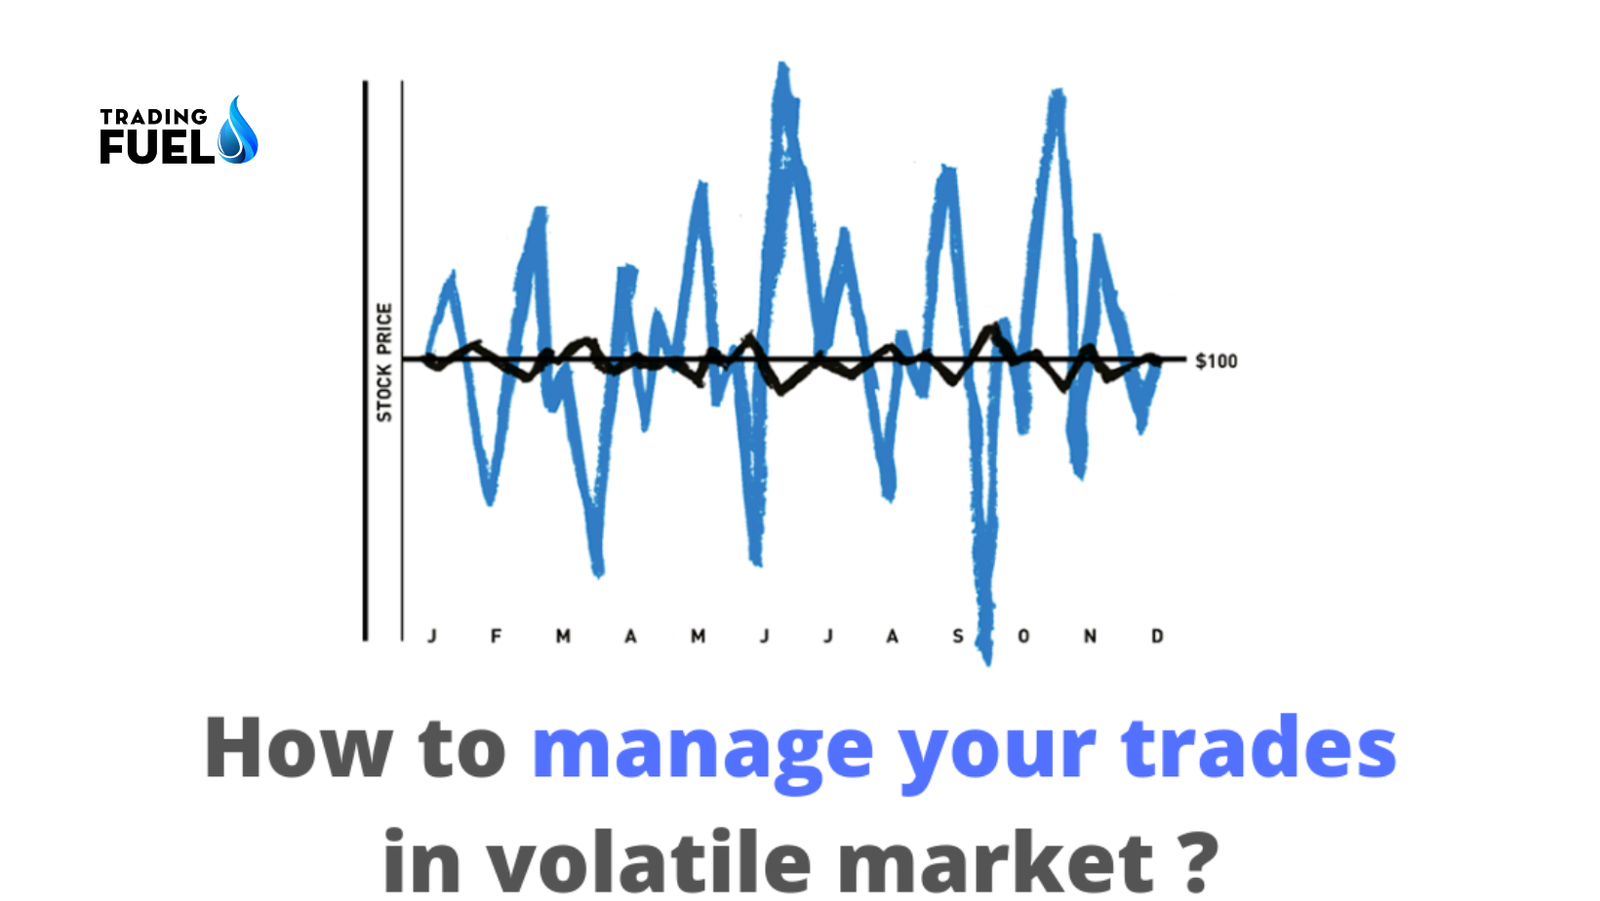 How to Manage Trades in a Volatile Market?